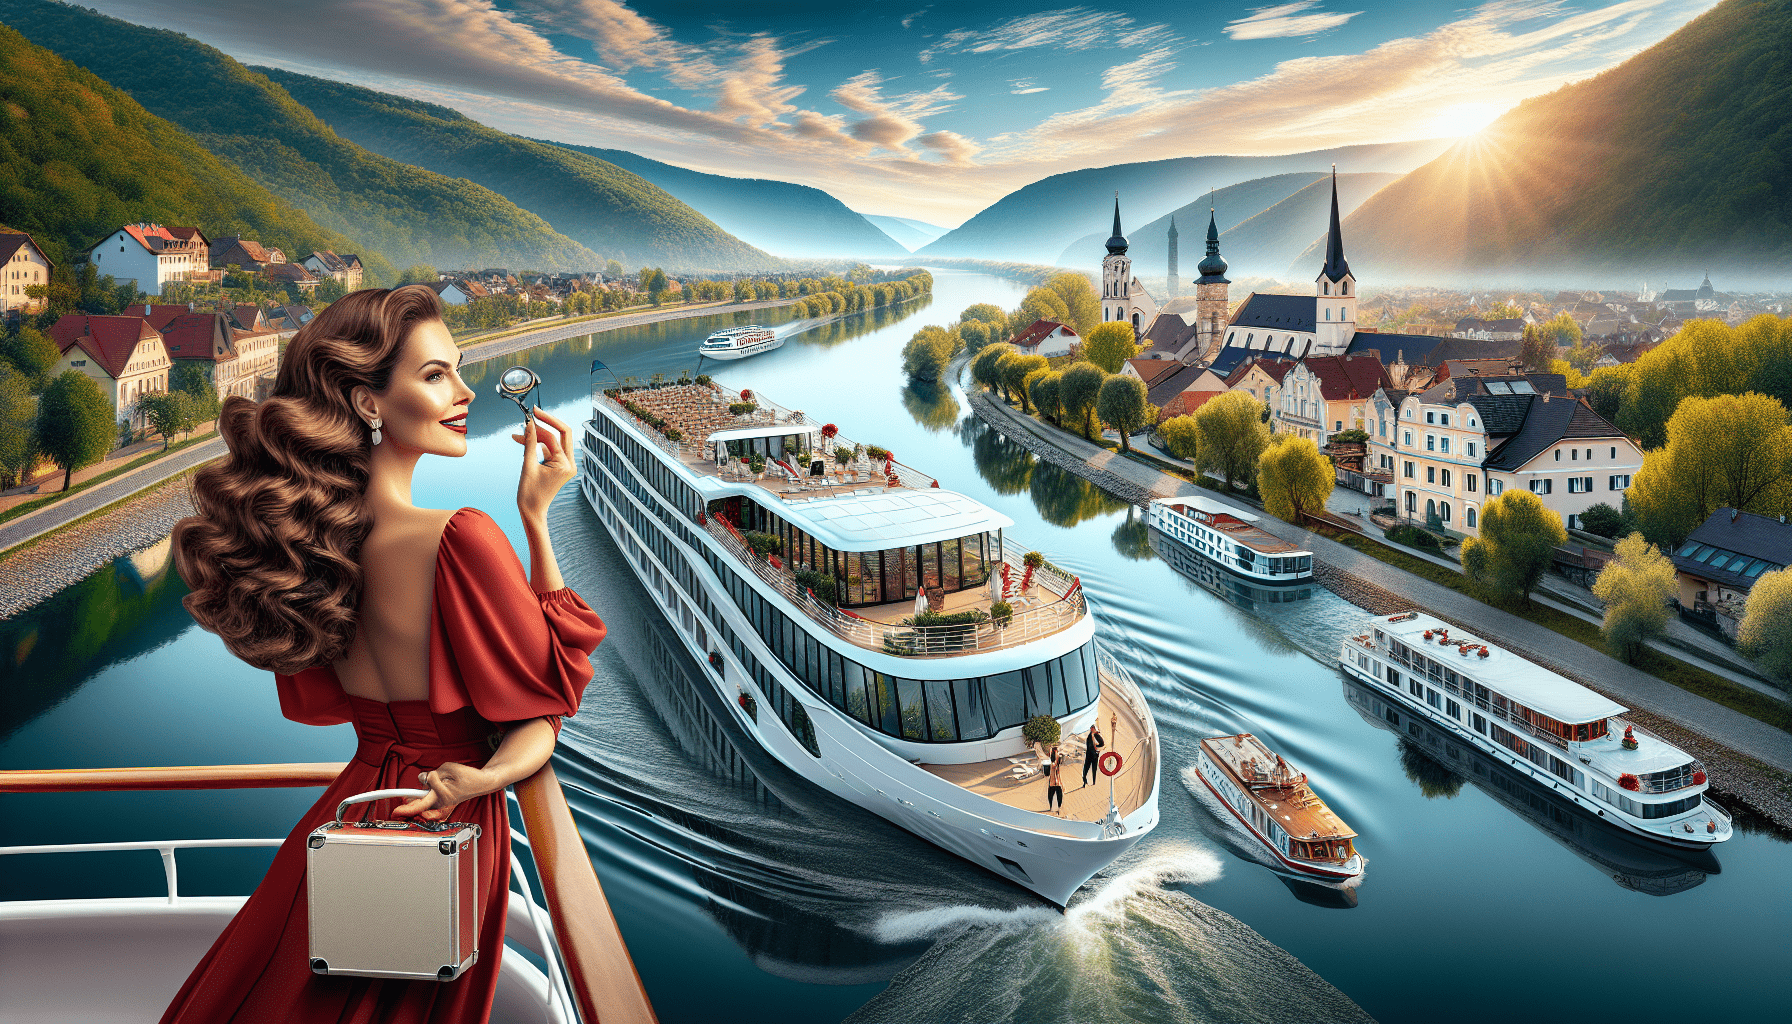 What Ship Was Jane McDonald On The Danube Cruise?